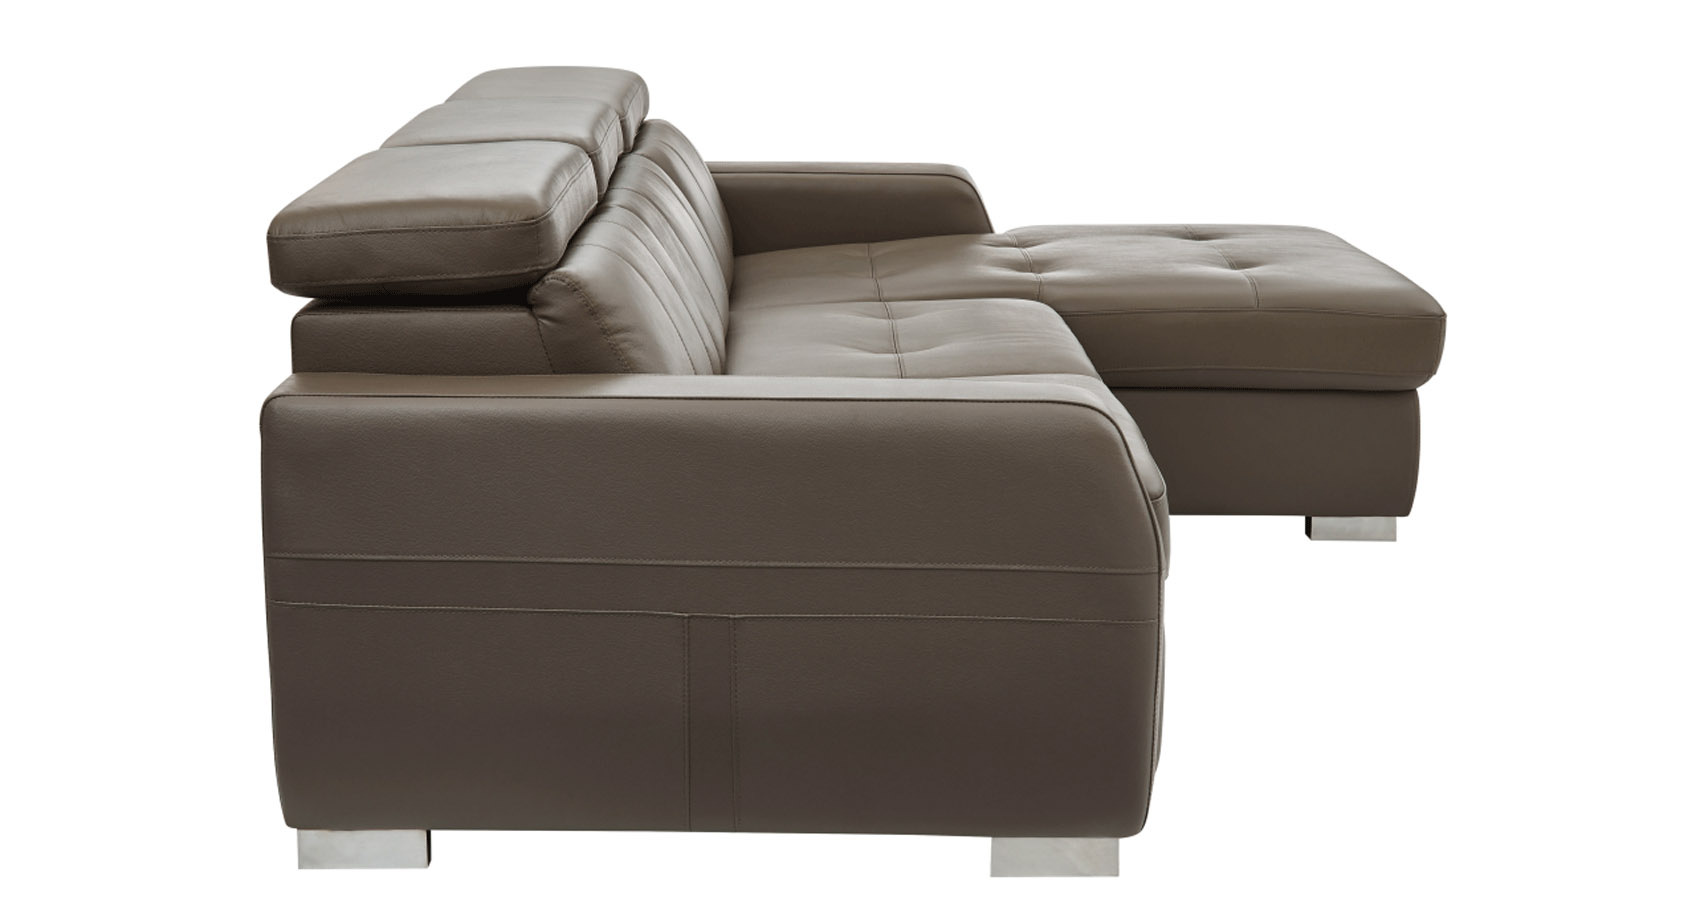 Stylish Sectional with Chrome Legs High Quality Leather